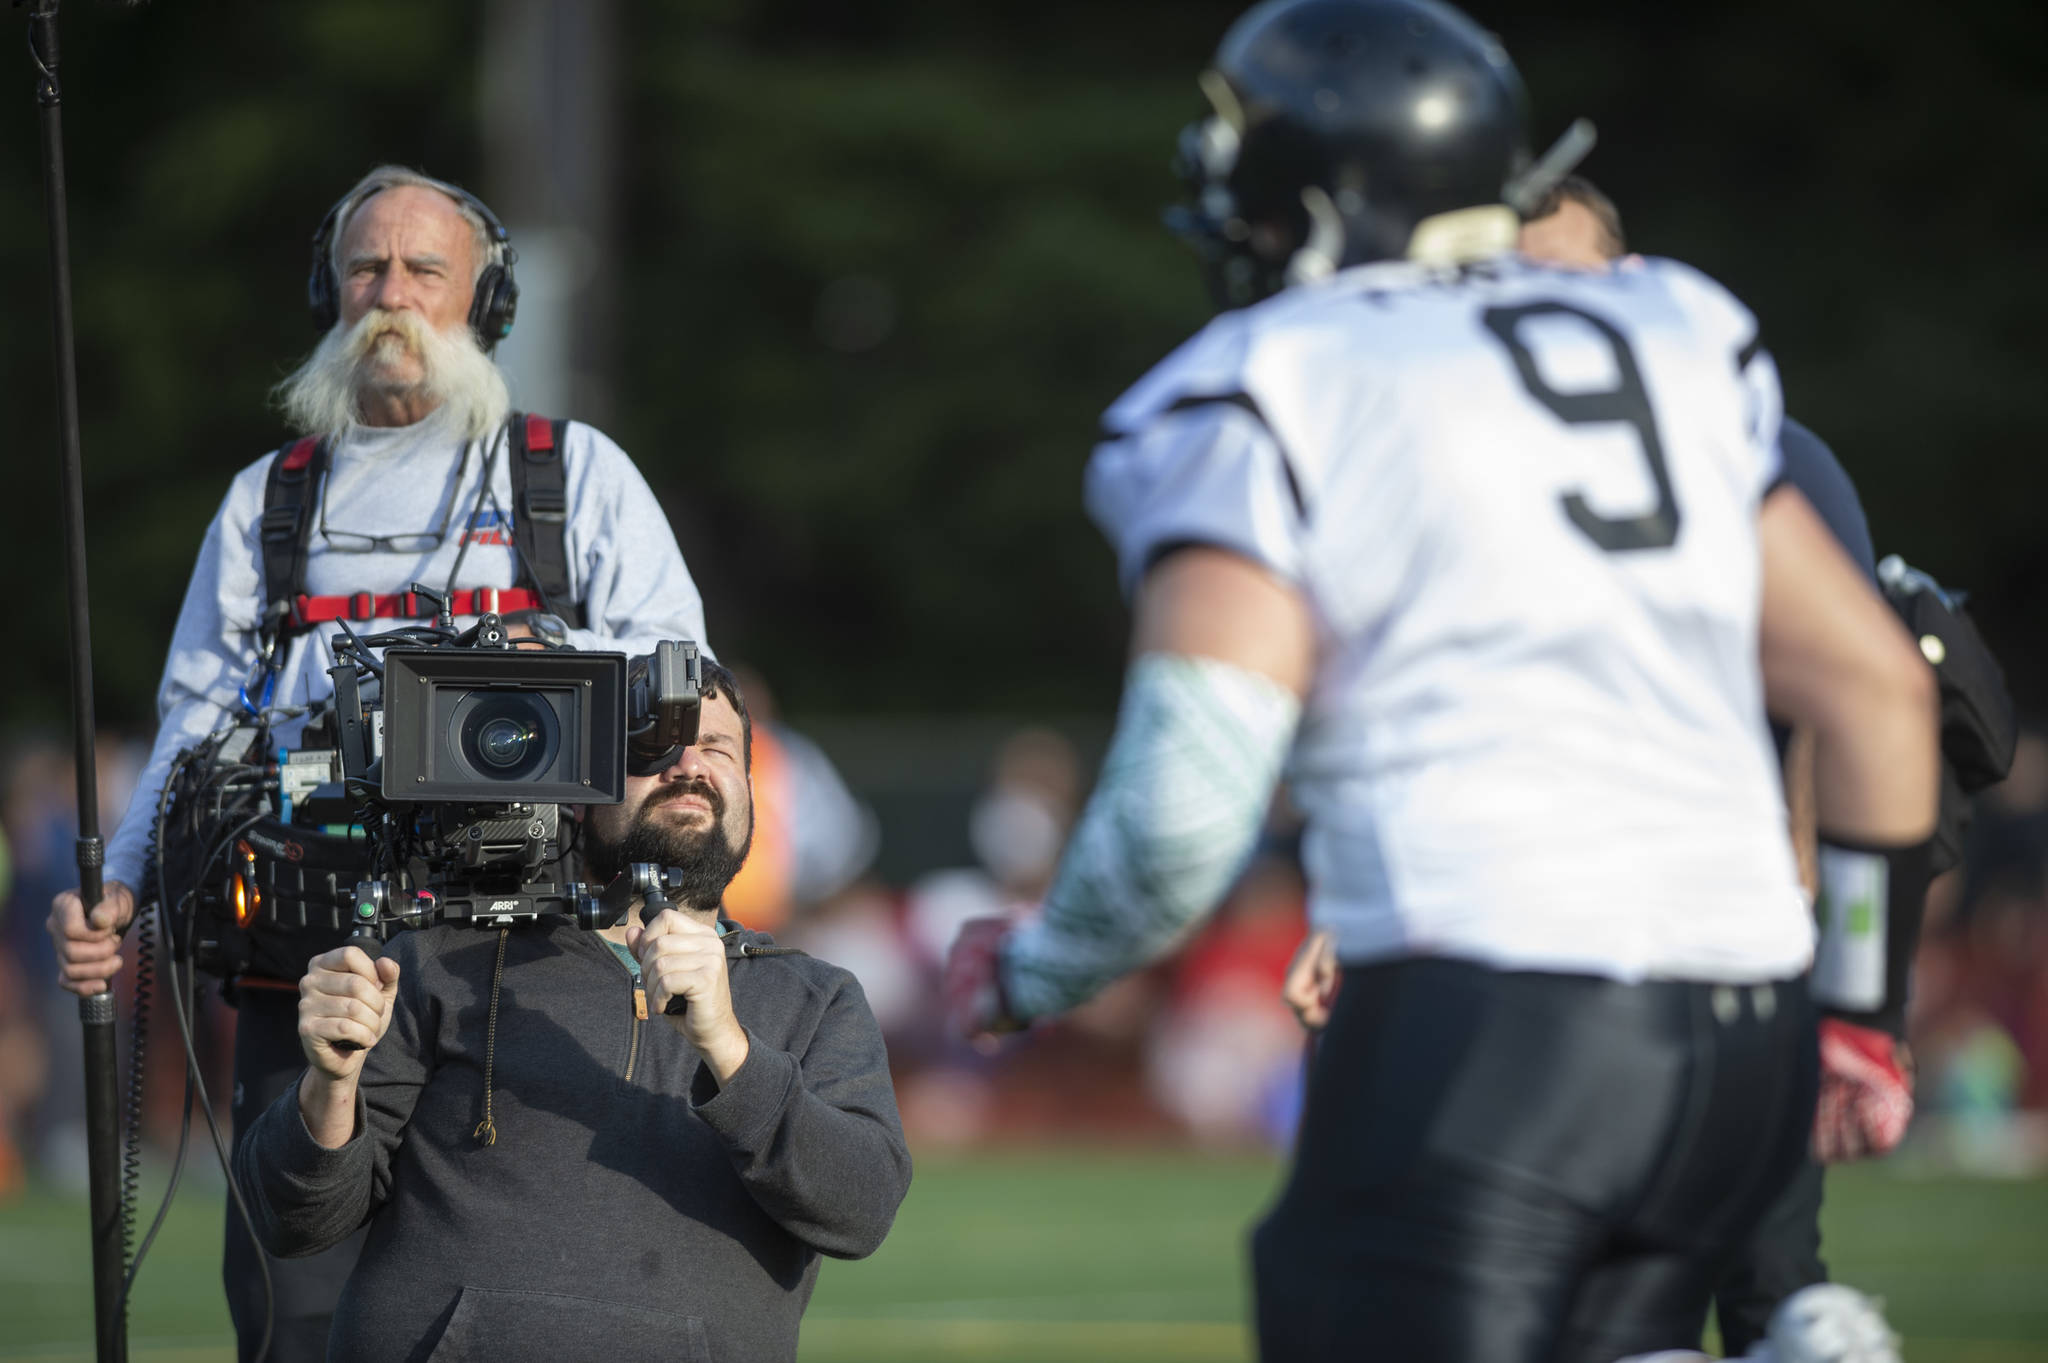 A video crew from NFL Films documents the 1st annual Juneau Alumni Football Game with football players, dance team members and cheerleaders from Juneau-Douglas and Thunder Mountain High Schools at Adair-Kennedy Memorial Field on Friday, May 24, 2019. (Michael Penn | Juneau Empire)